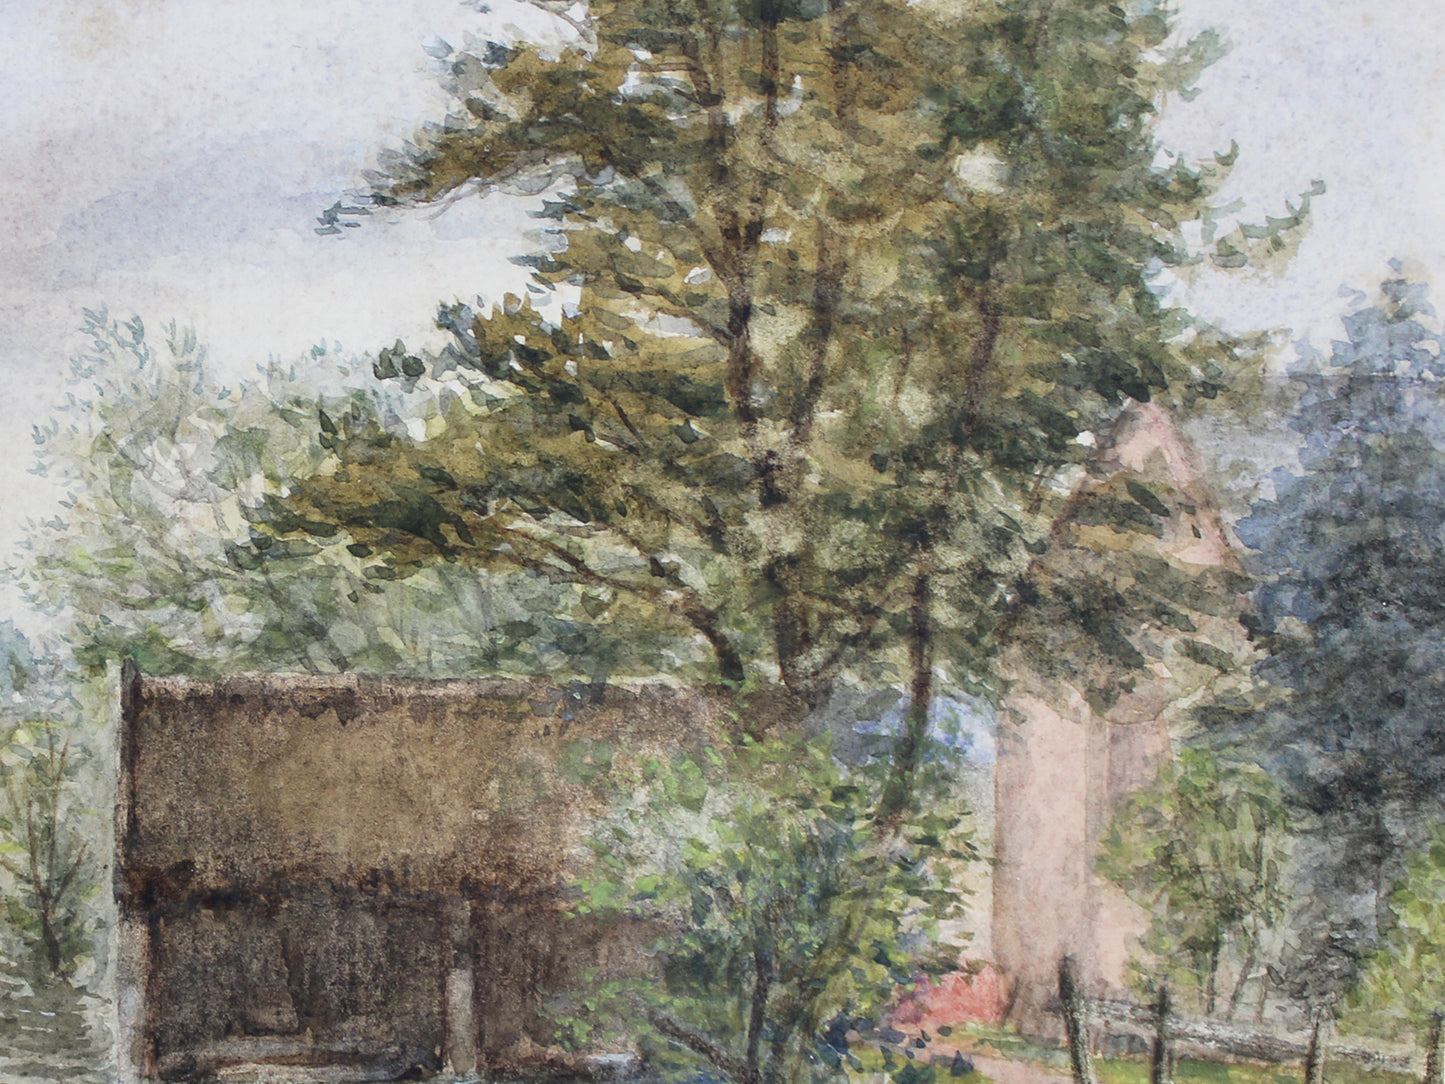 Early 20th Century Watercolour by Enid Eyre